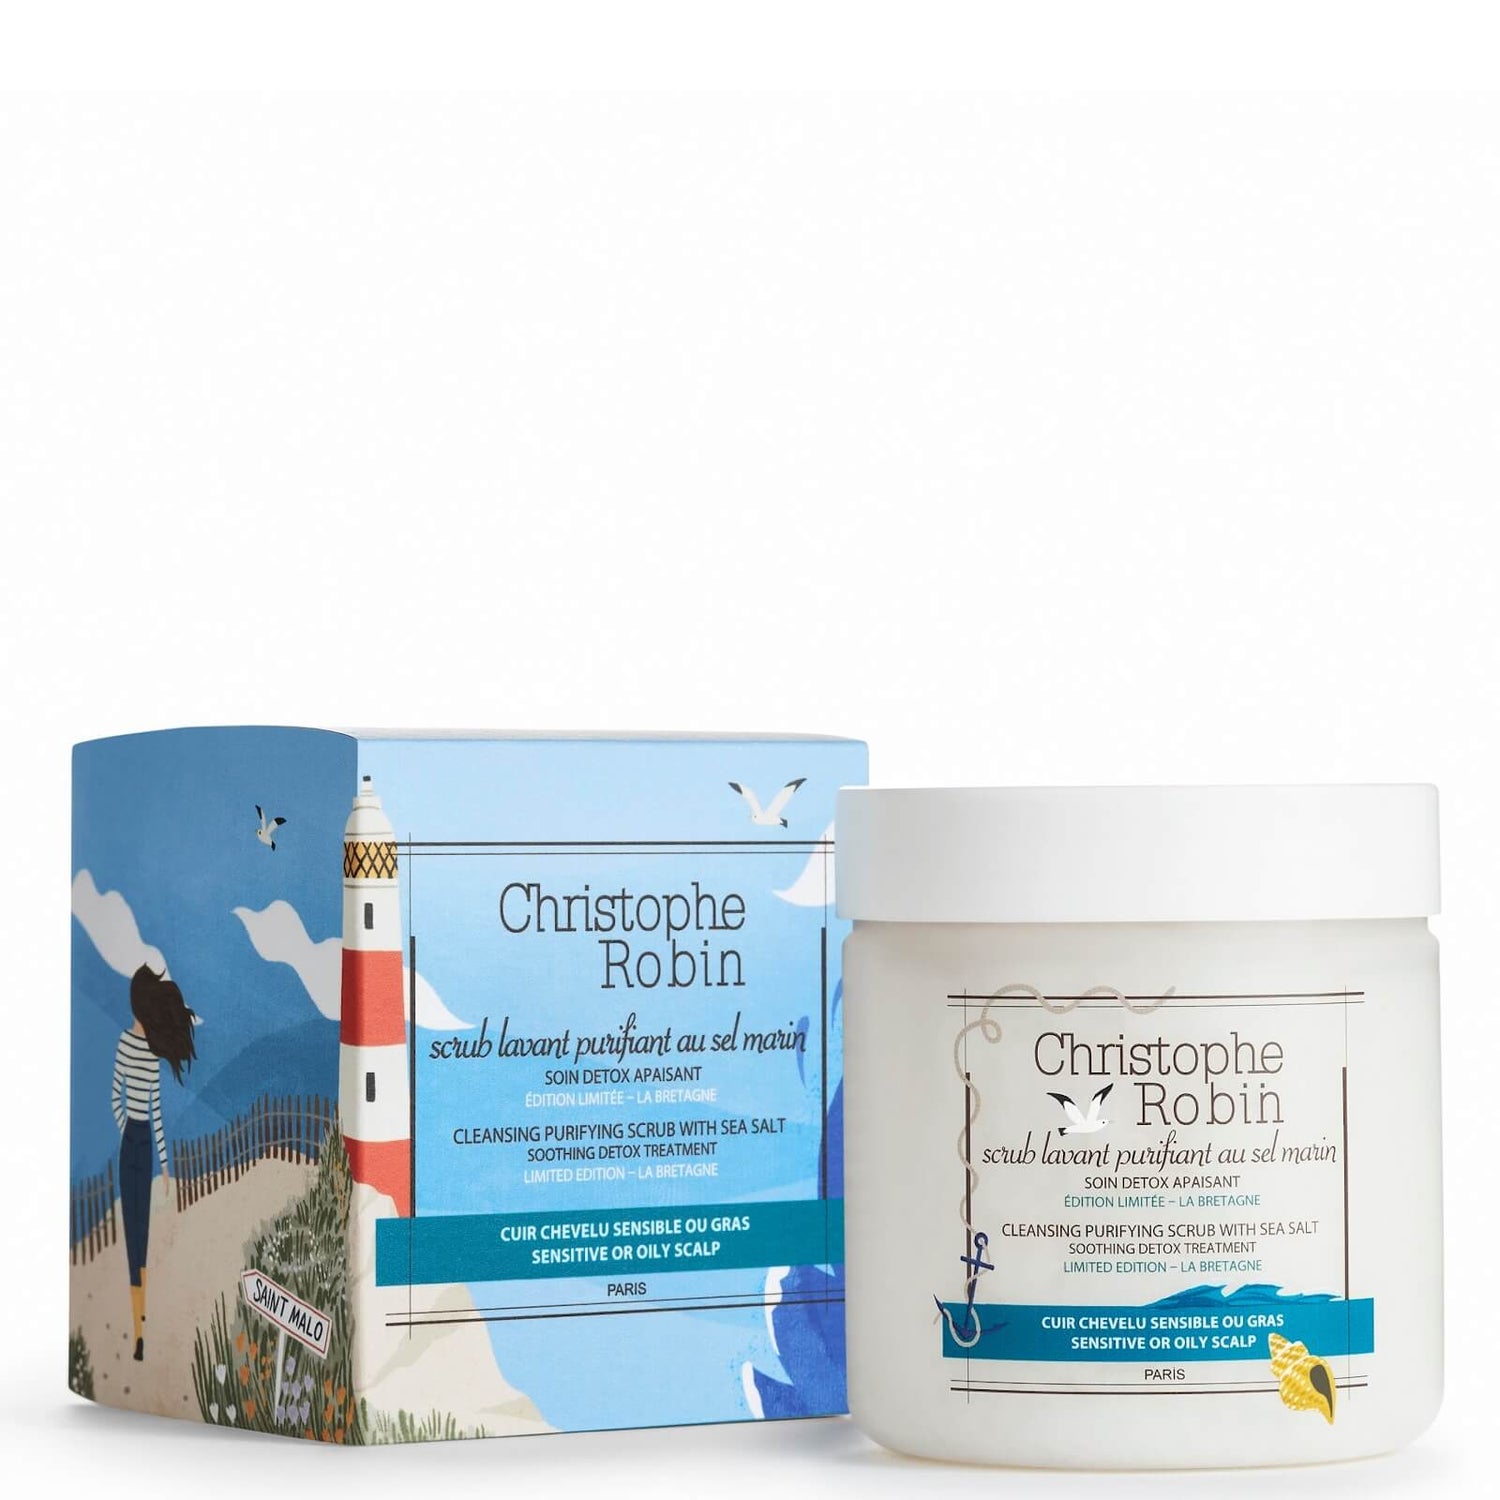 Christophe Robin Cleansing Limited Edition Cleansing Purifying Scrub with Sea Salt - La Bretagne